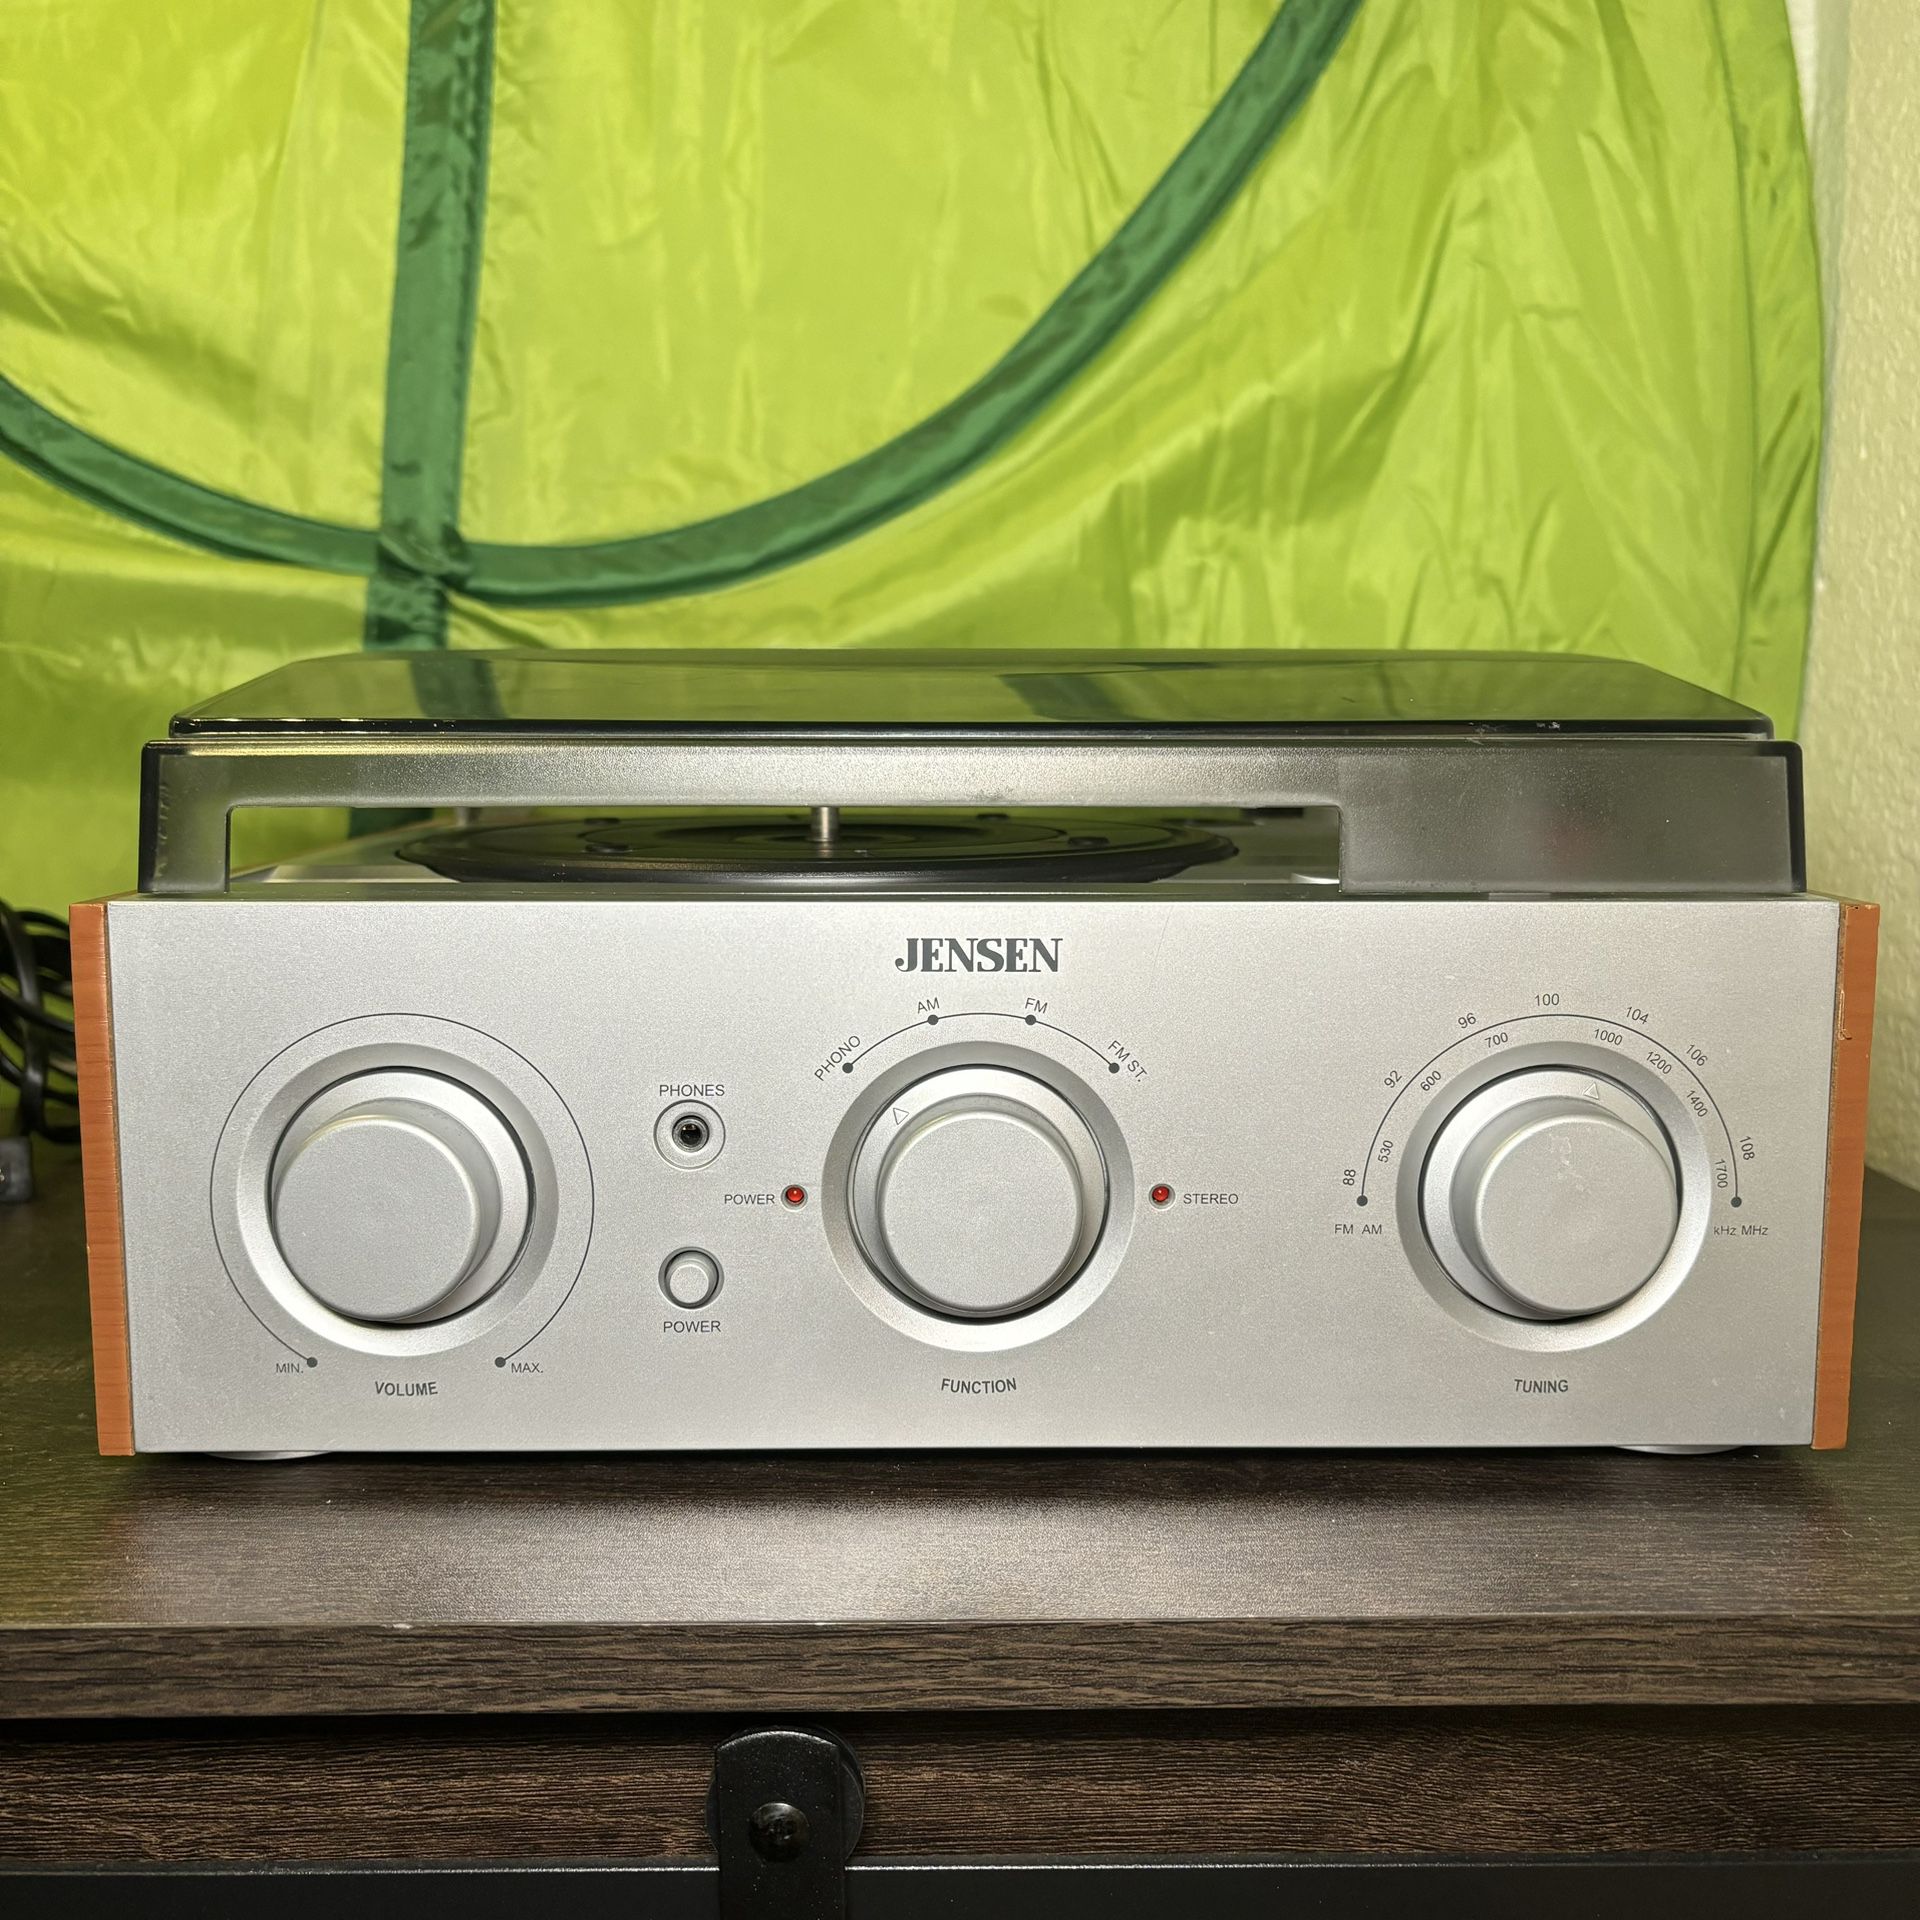 Jensen 3-Speed Stereo Turntable With AM/FM